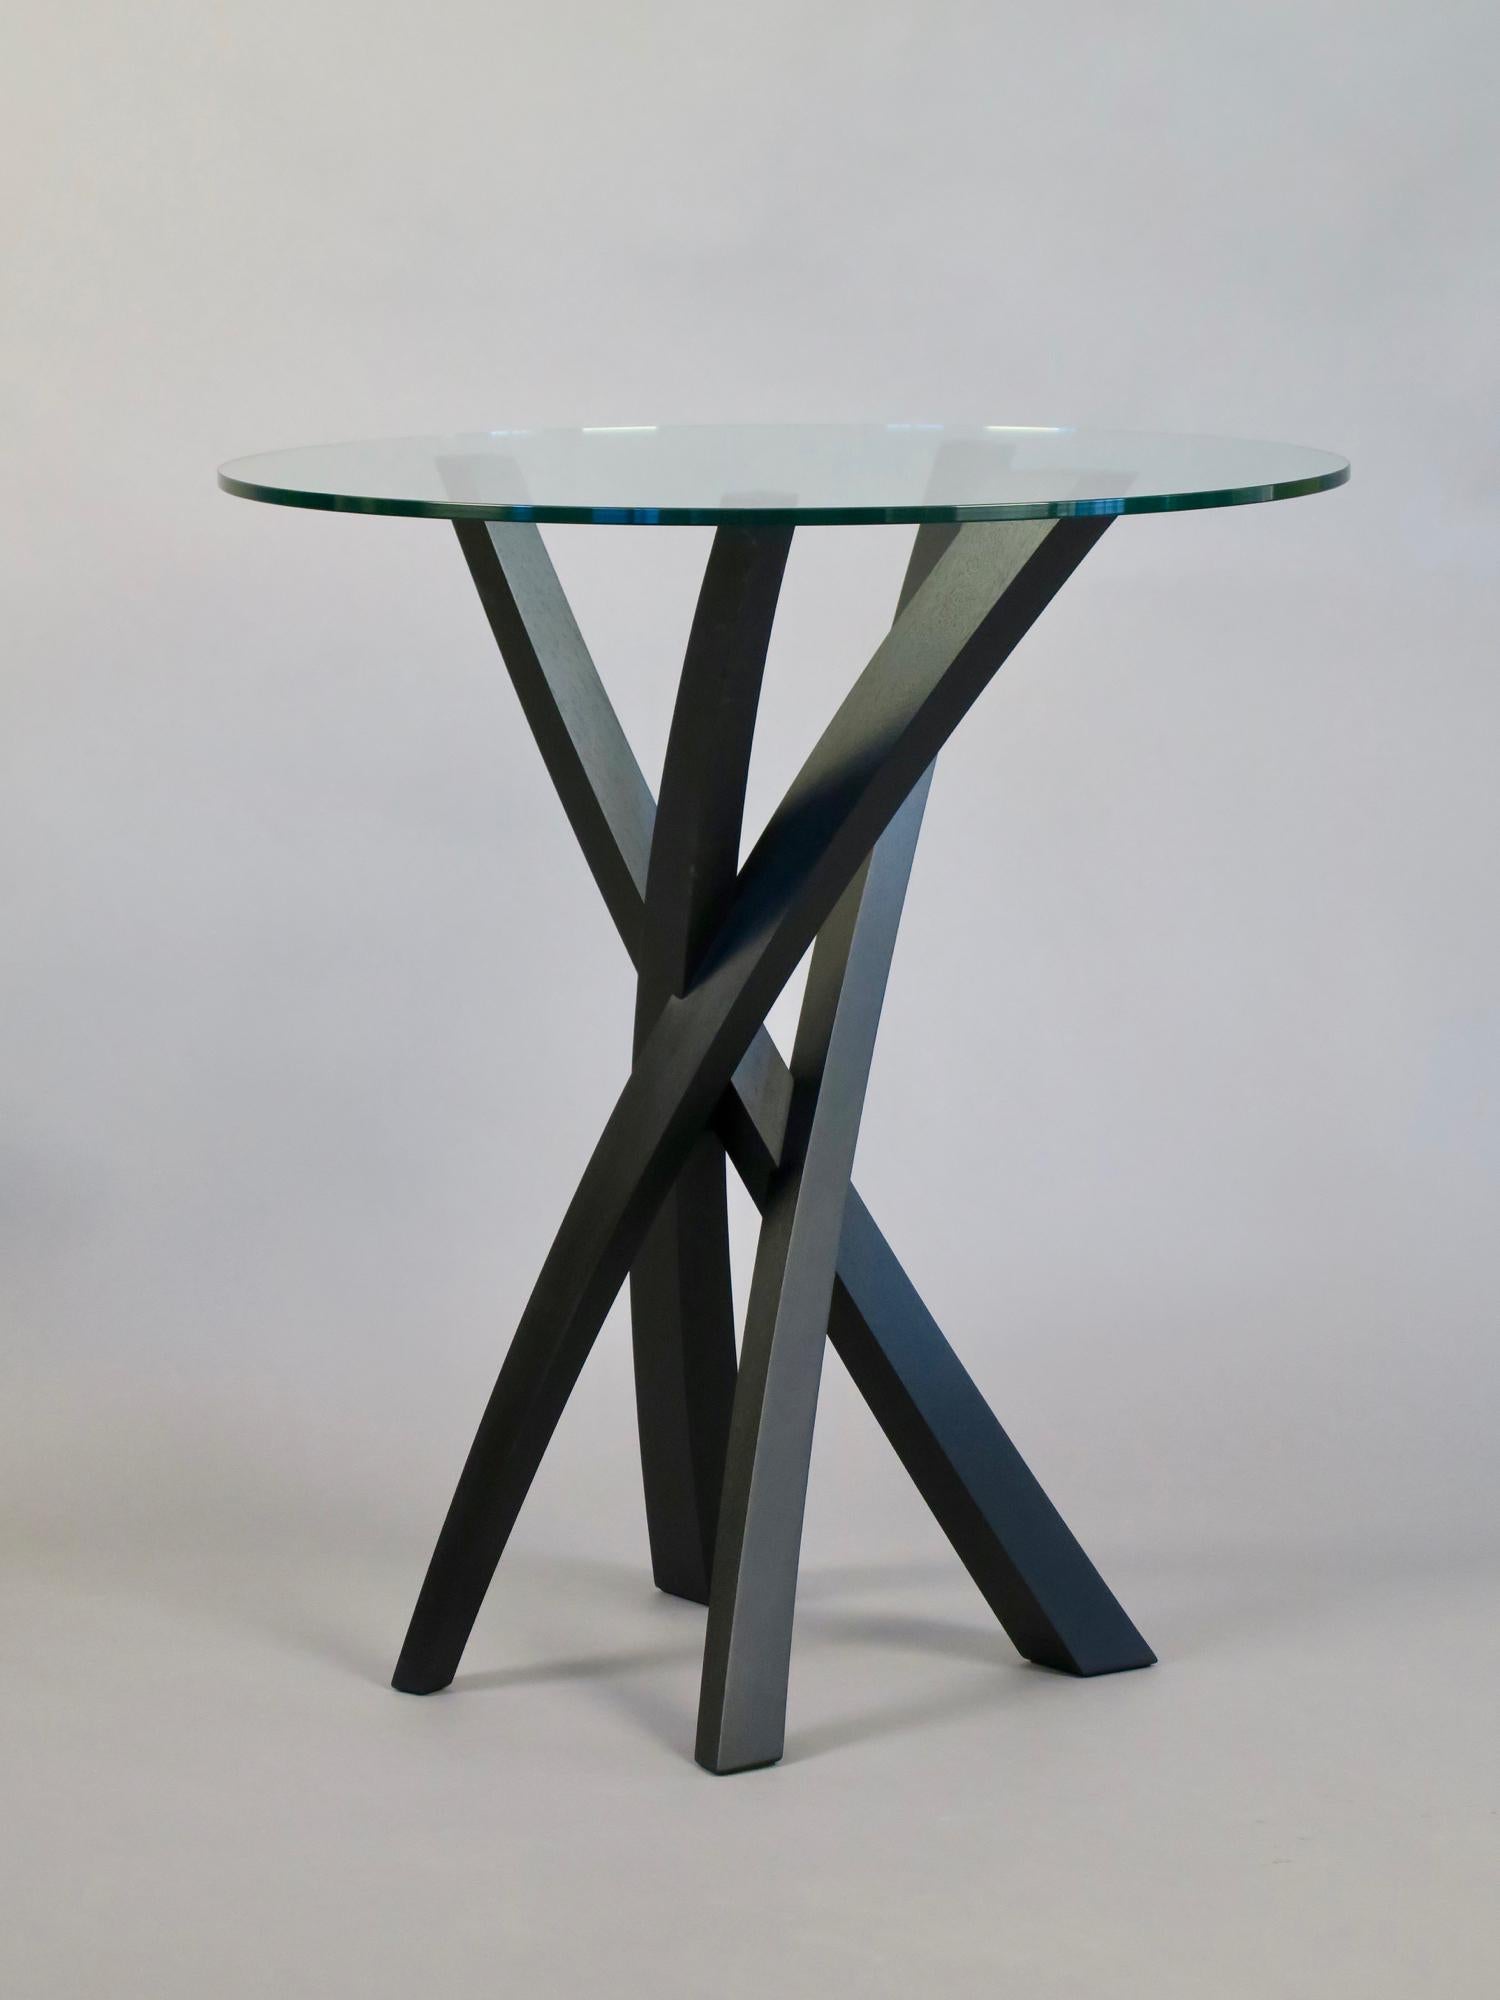 Sculptural Walnut and Glass Side Table by Thomas Throop/ Black Creek Designs In New Condition For Sale In New Canaan, CT